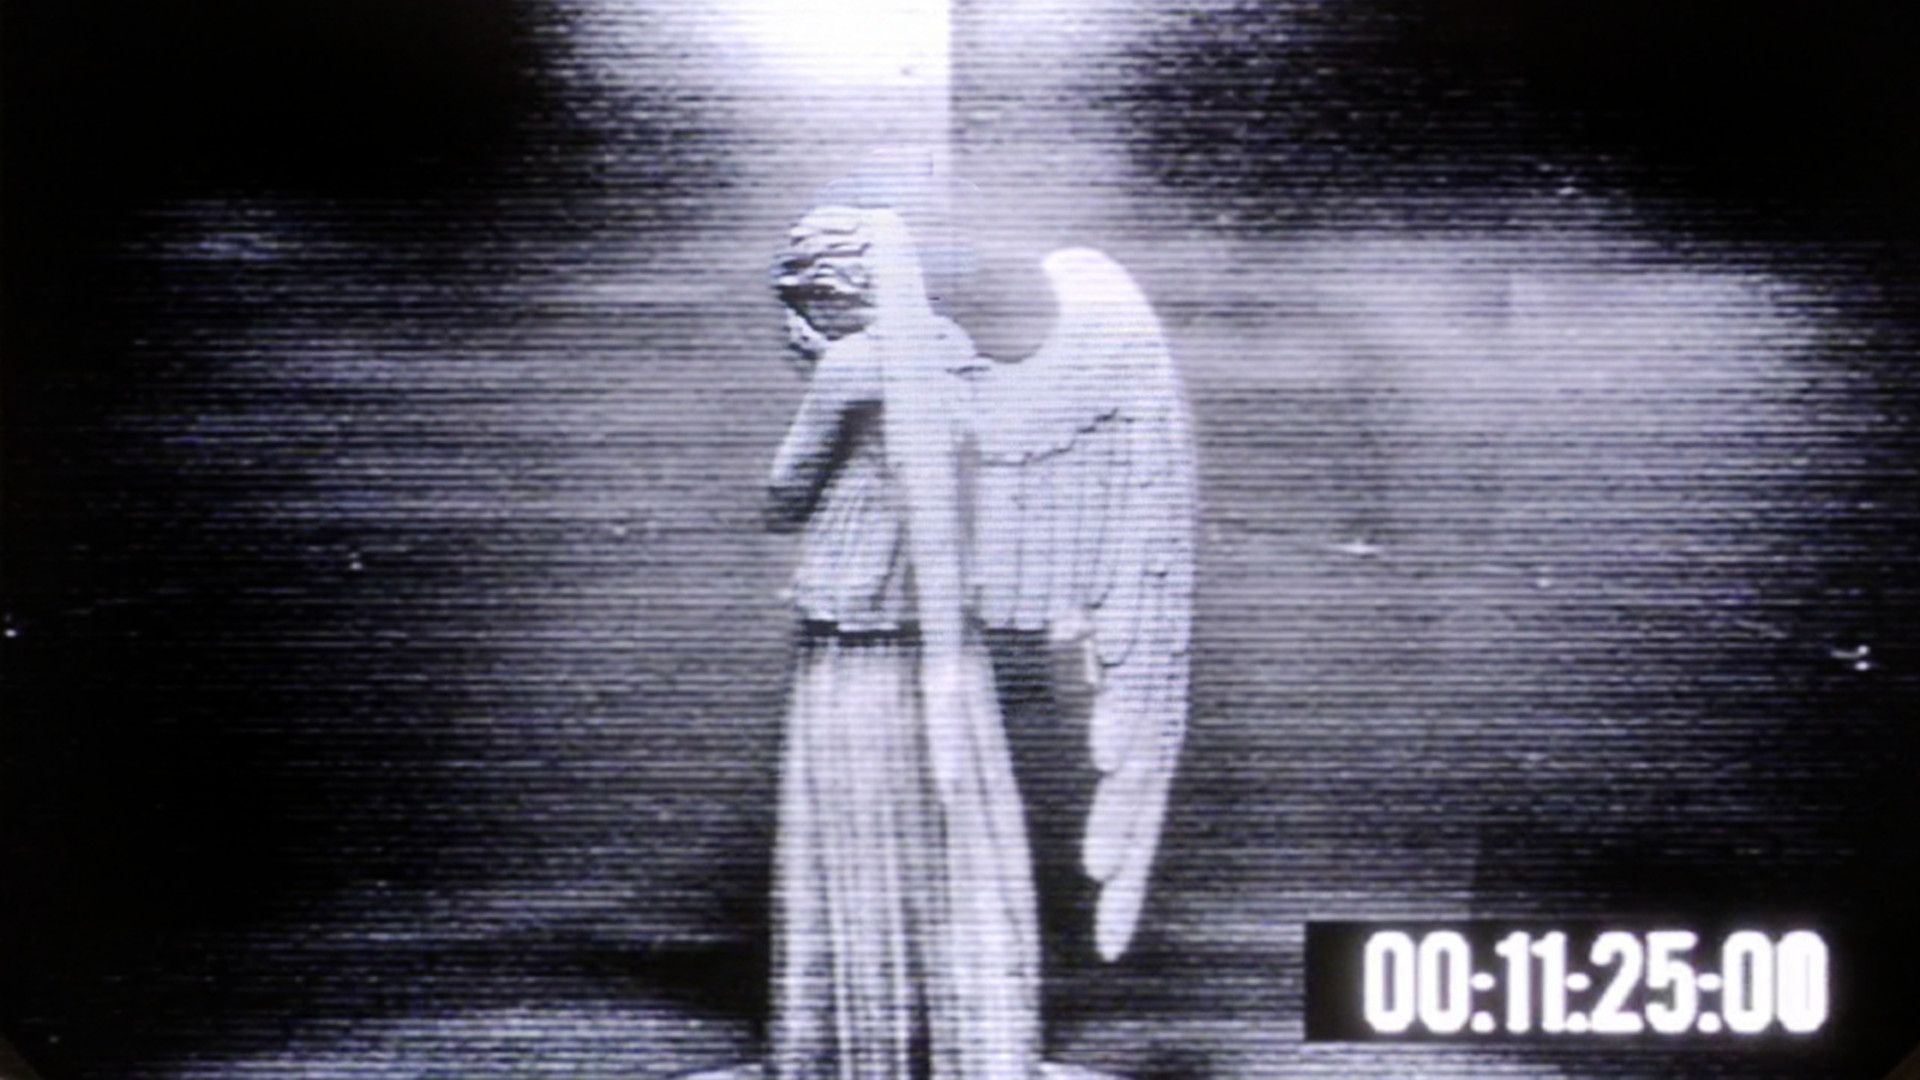 1920x1080 Weeping Angels wallpapers. Set it to change every few seconds for some fun.